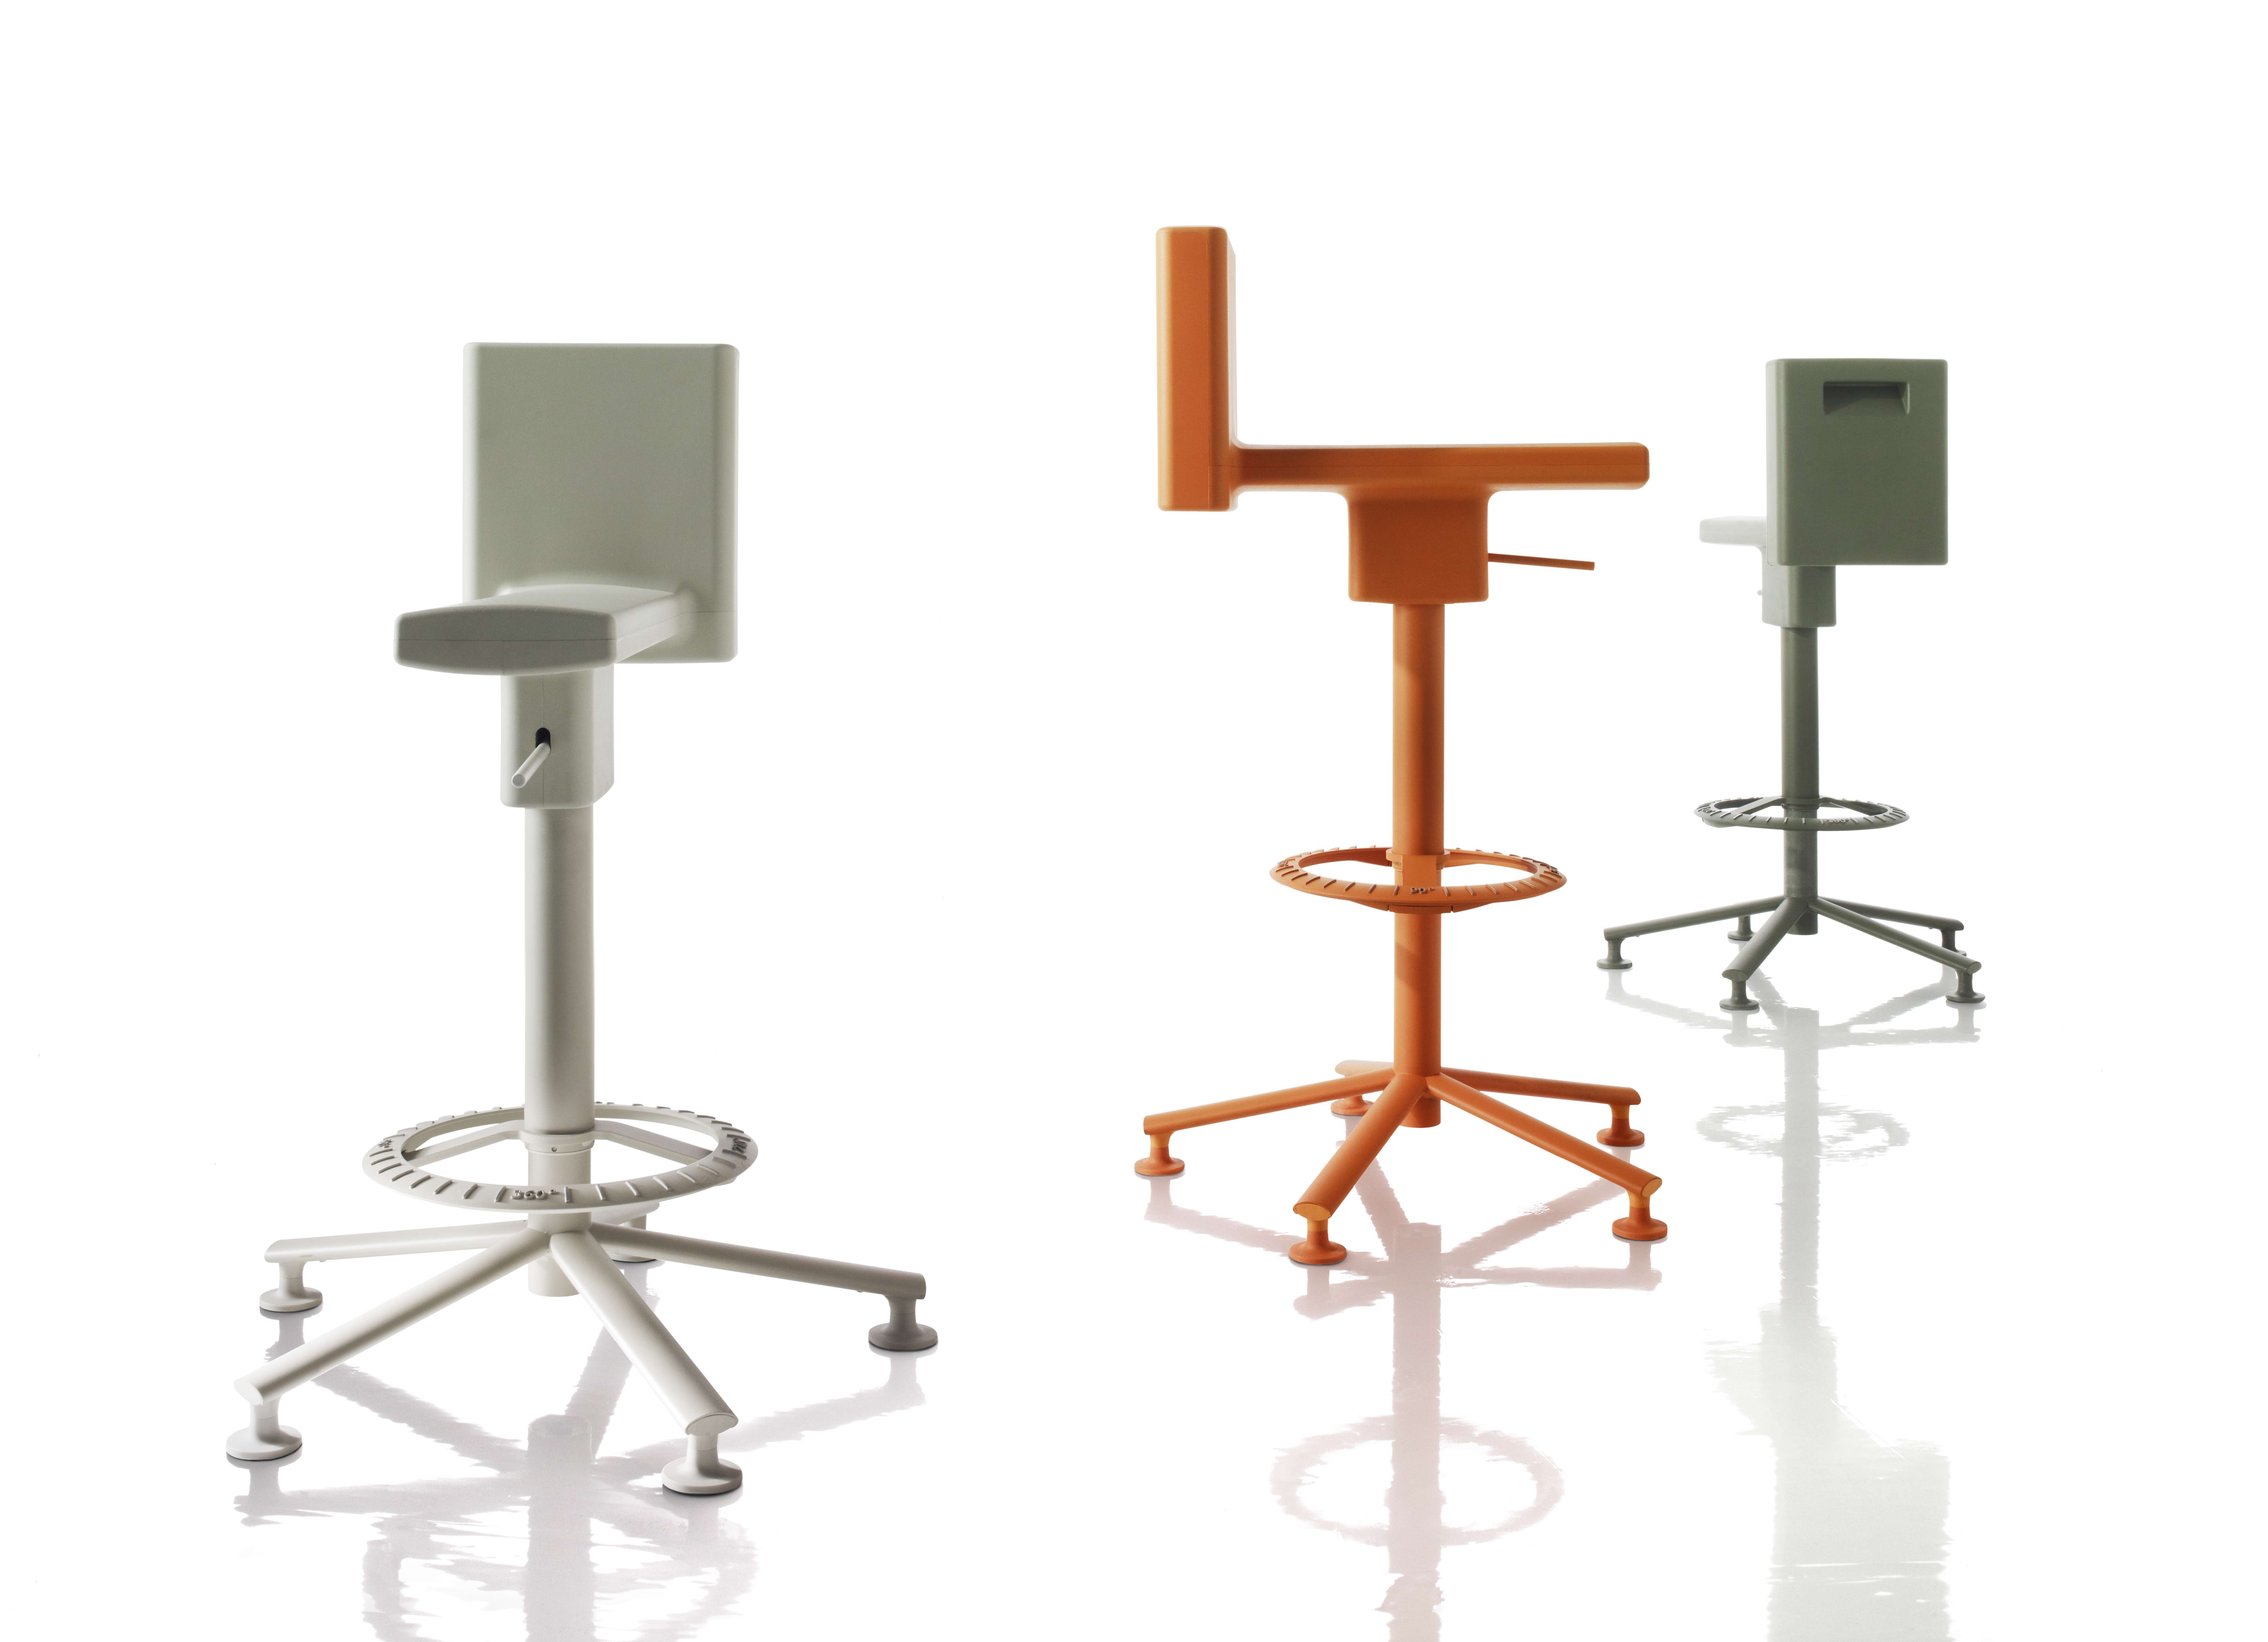 The 360° Stool designed by Konstantin Grcic for Magis.